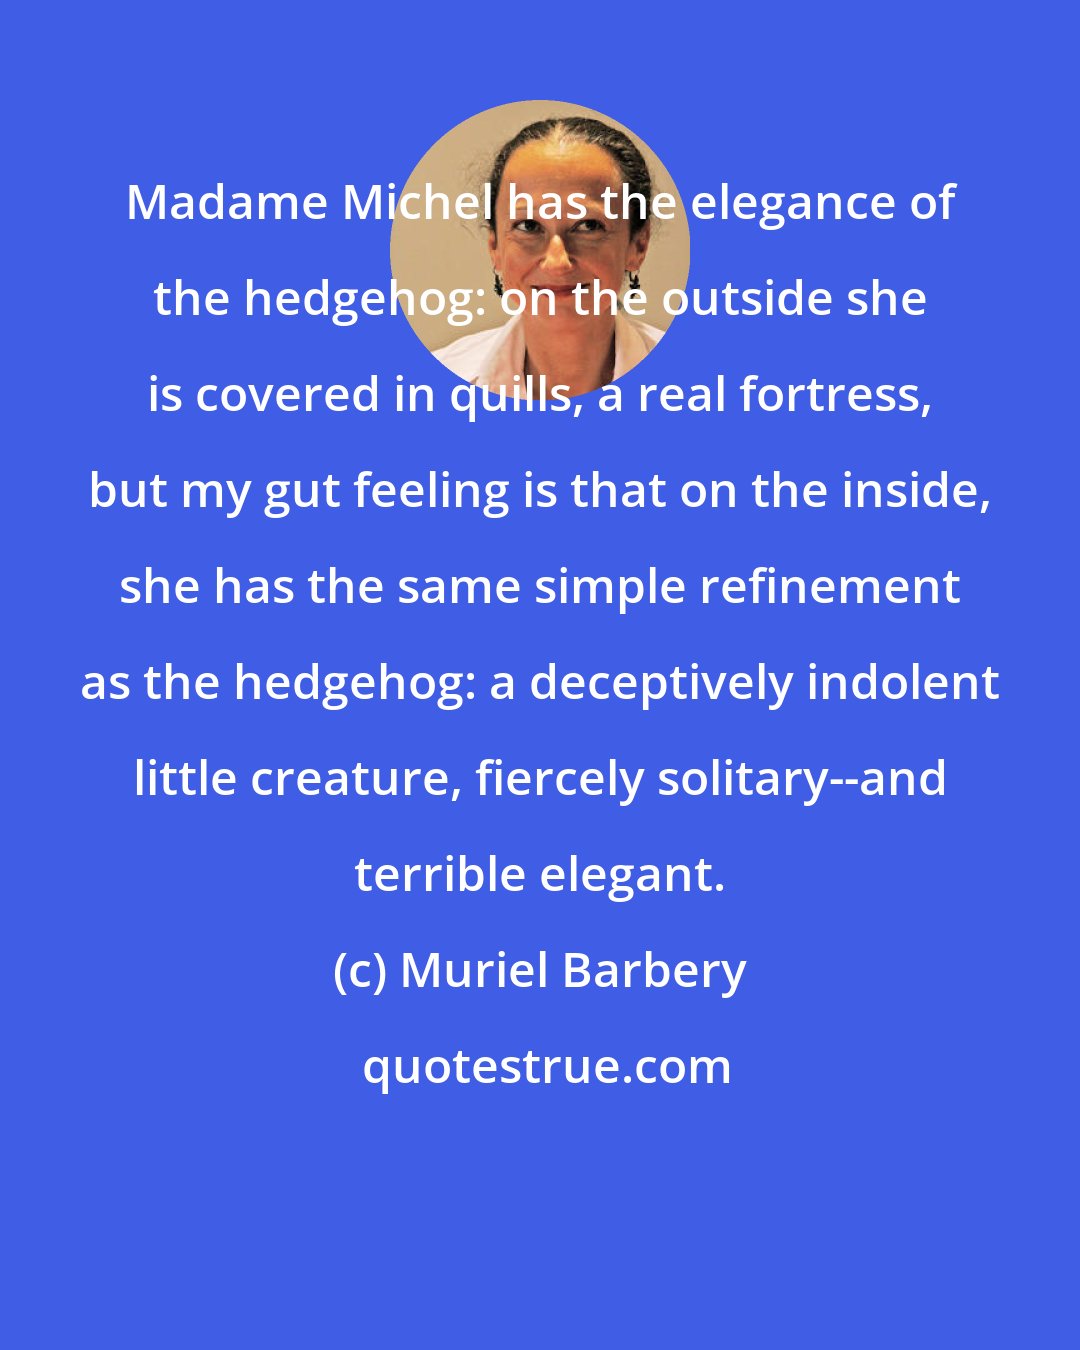 Muriel Barbery: Madame Michel has the elegance of the hedgehog: on the outside she is covered in quills, a real fortress, but my gut feeling is that on the inside, she has the same simple refinement as the hedgehog: a deceptively indolent little creature, fiercely solitary--and terrible elegant.